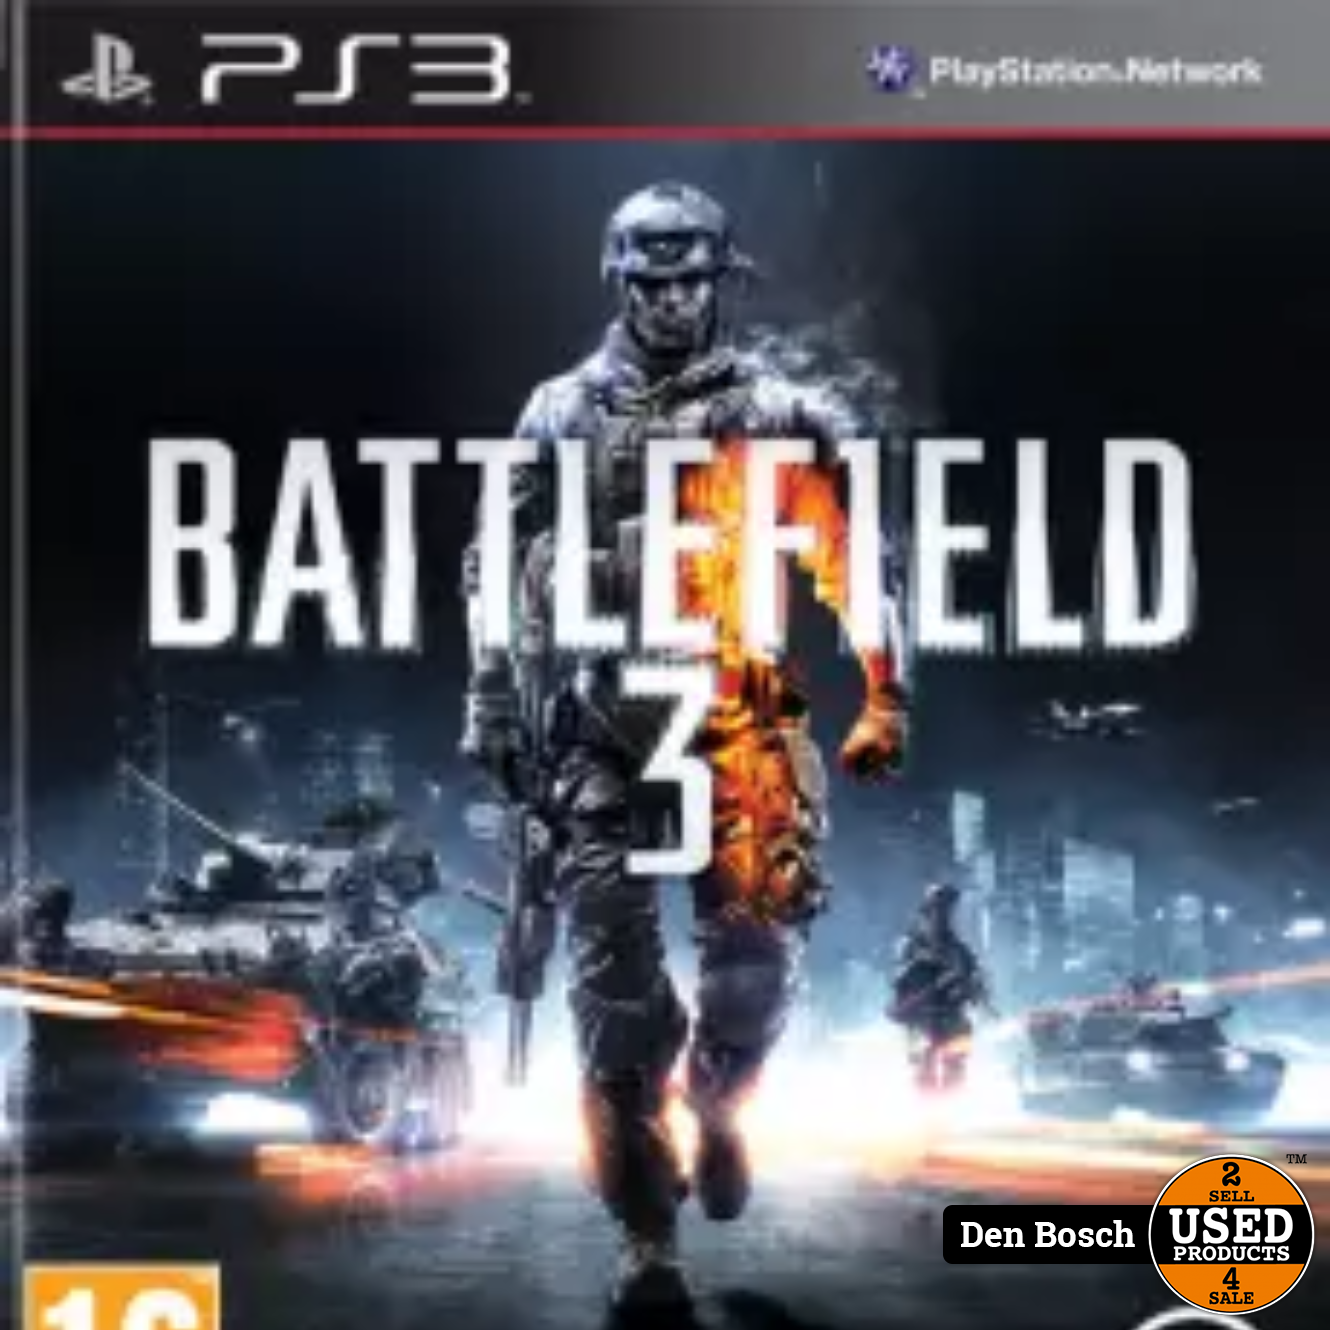 Battlefield 3 - PS3 Game - Used Products Bosch